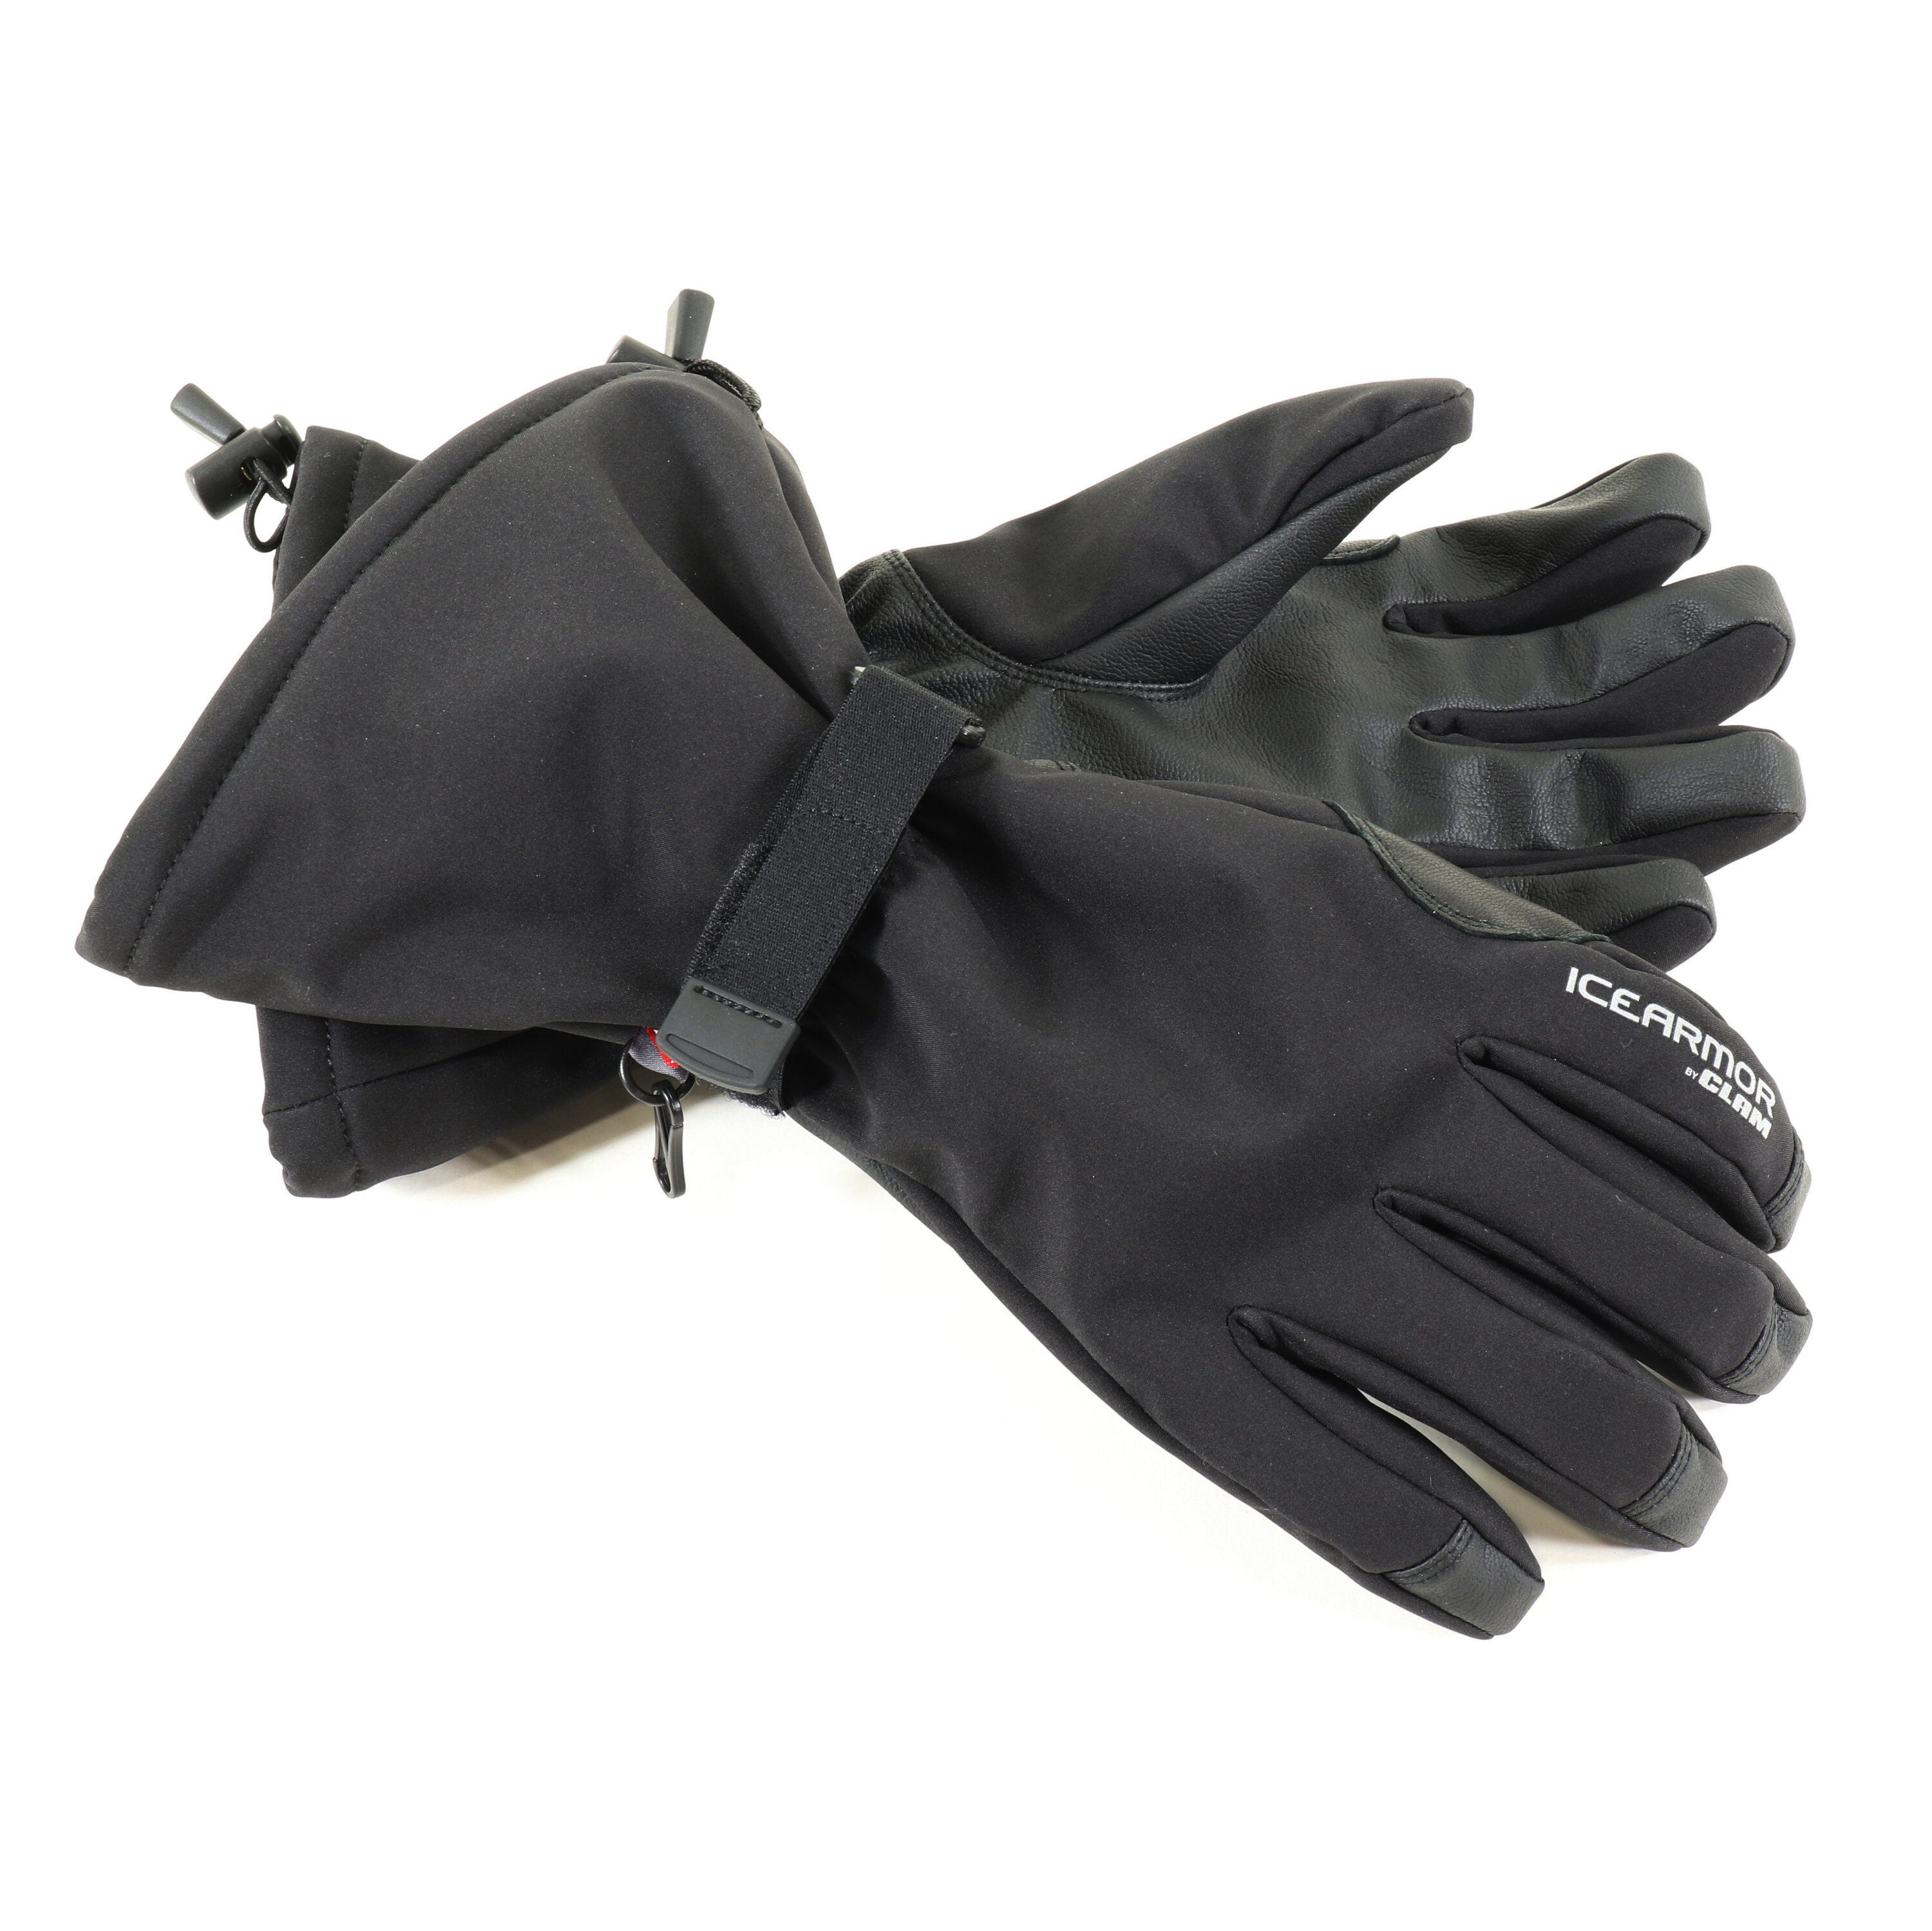 Clam Outdoors Women's Extreme Ice Fishing Glove - XL - Black in